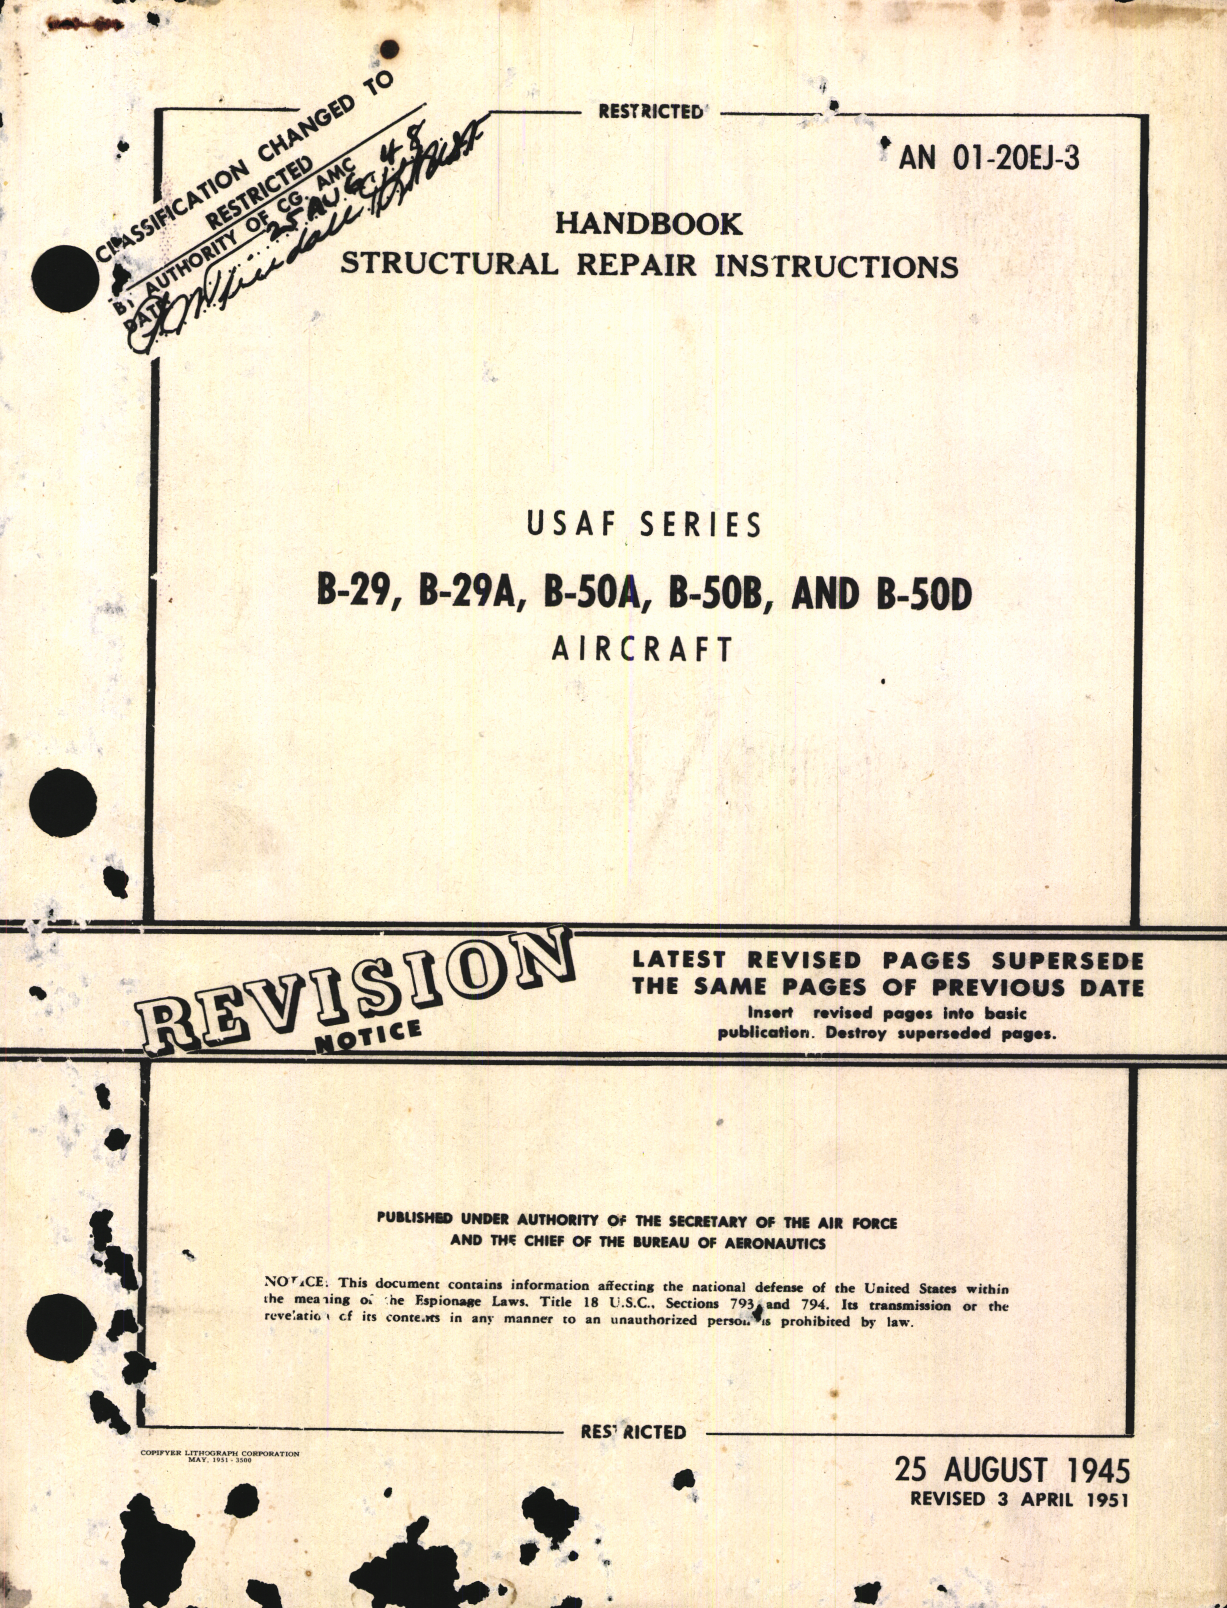 Sample page 1 from AirCorps Library document: Structural Repair Instructions for B-29, B-29A, B-50A, B-50B, and B-50D Aircraft